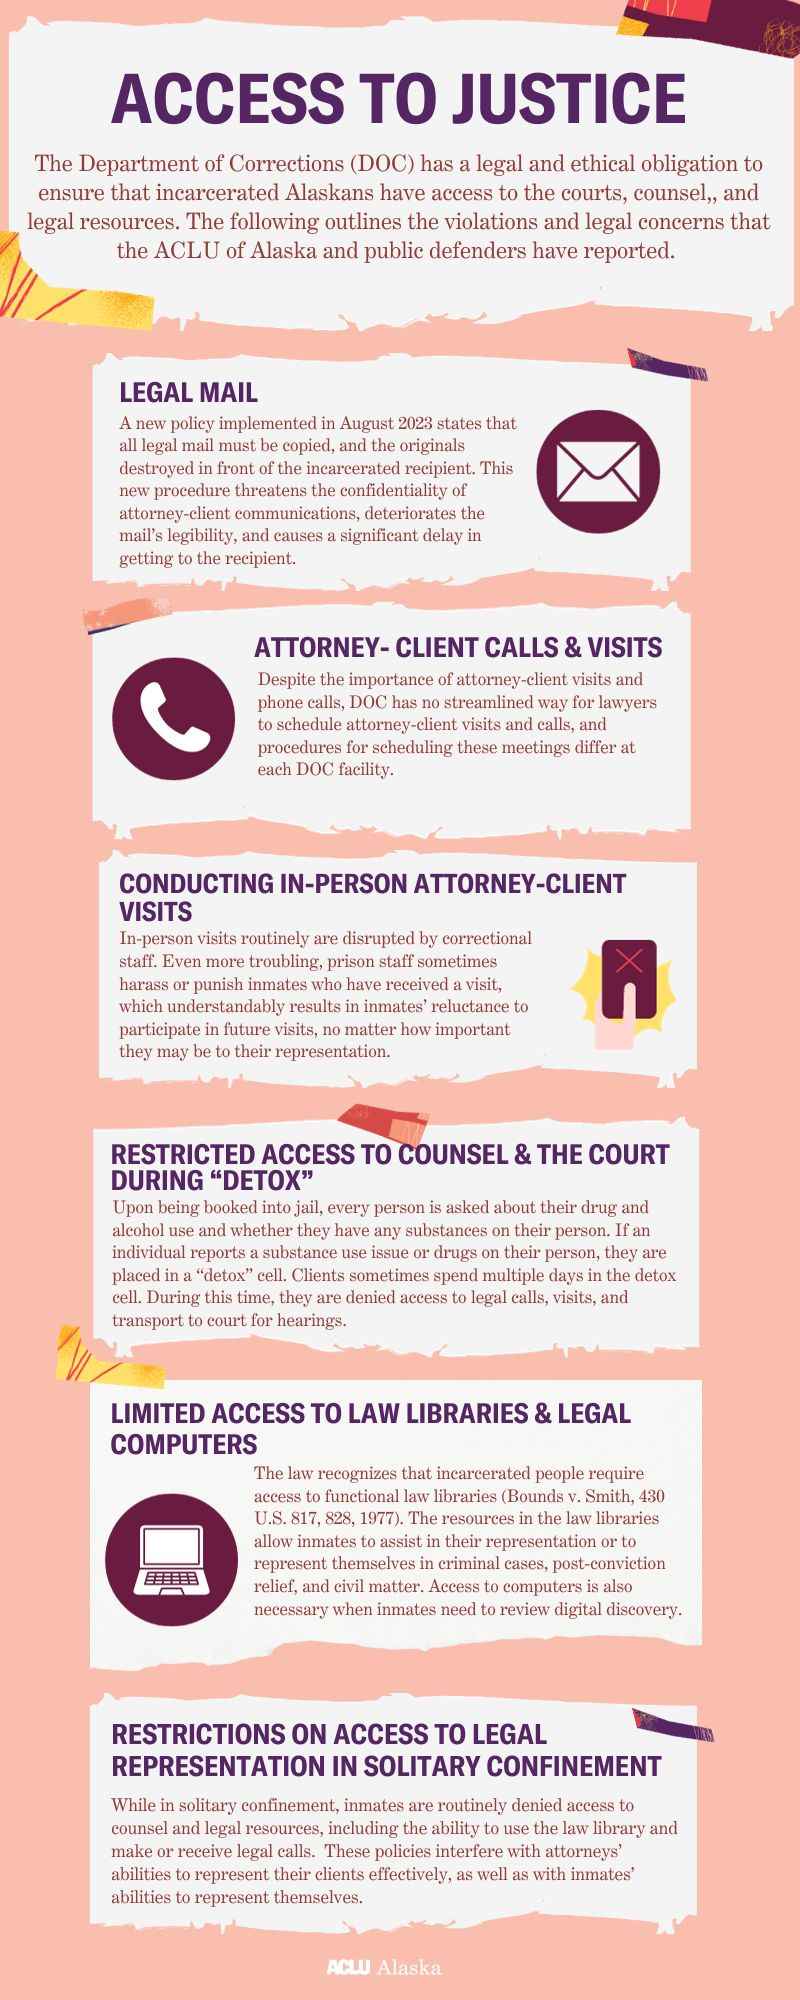 Access to Justice Infographic 